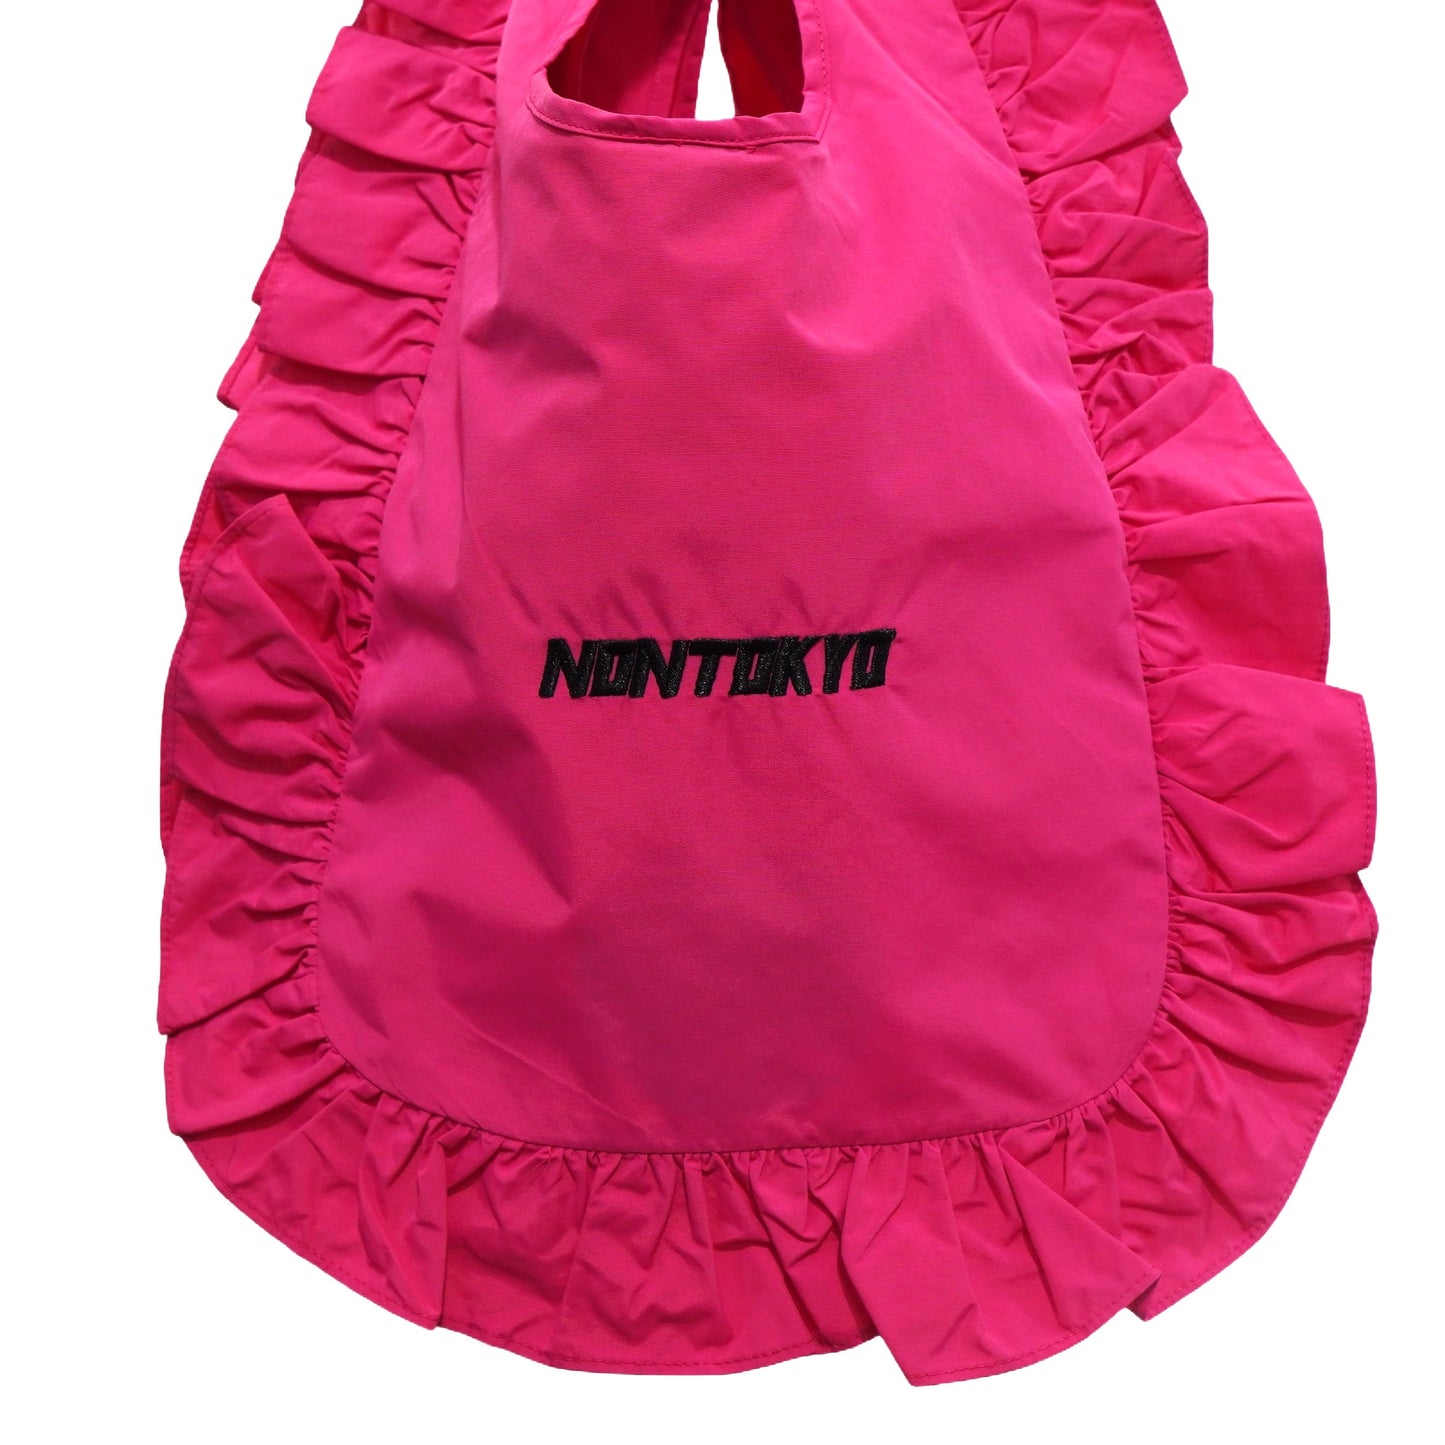 NON TOKYO / FRILL ECO BAG S (PINK) / 〈ノントーキョー〉フリルエコバッグ S (ピンク)